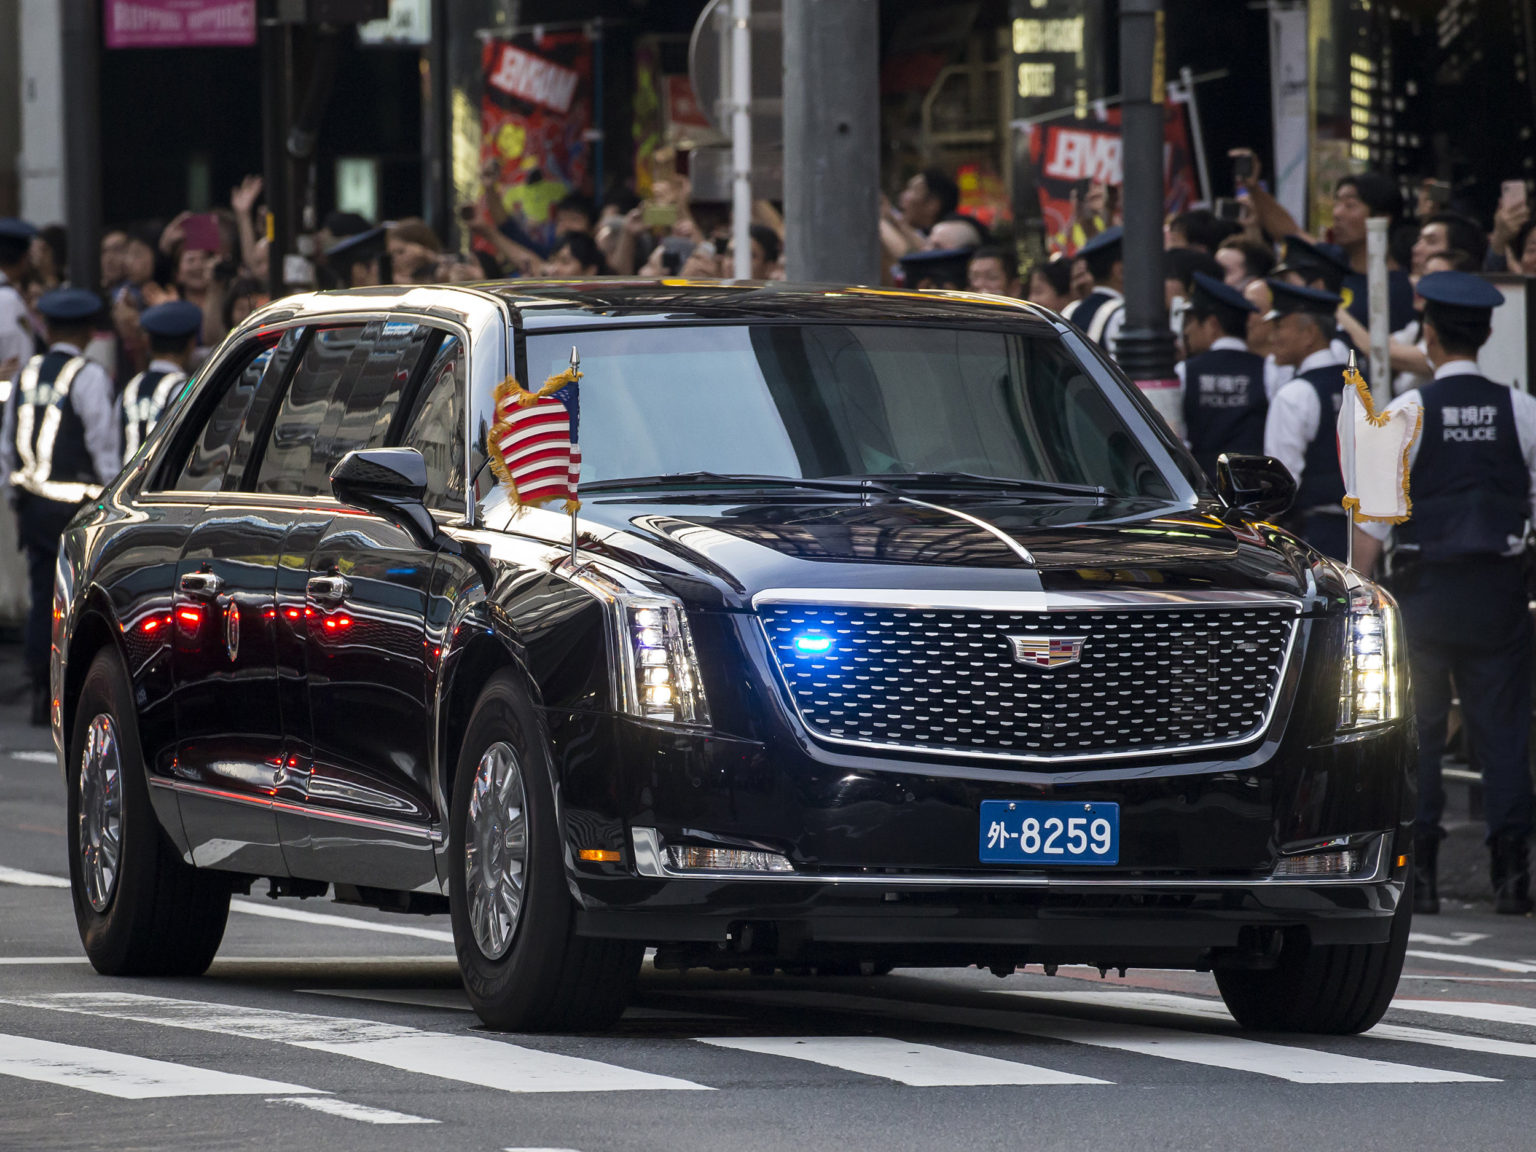 A motorcade carrying U.S. President Donald Trump, First Lady Melania Trump, Japan's Prime Minister Shinzo Abe and his wife Akie Abe arrives at a restaurant where they are due to have dinner on May 26, 2019 in Tokyo, Japan.